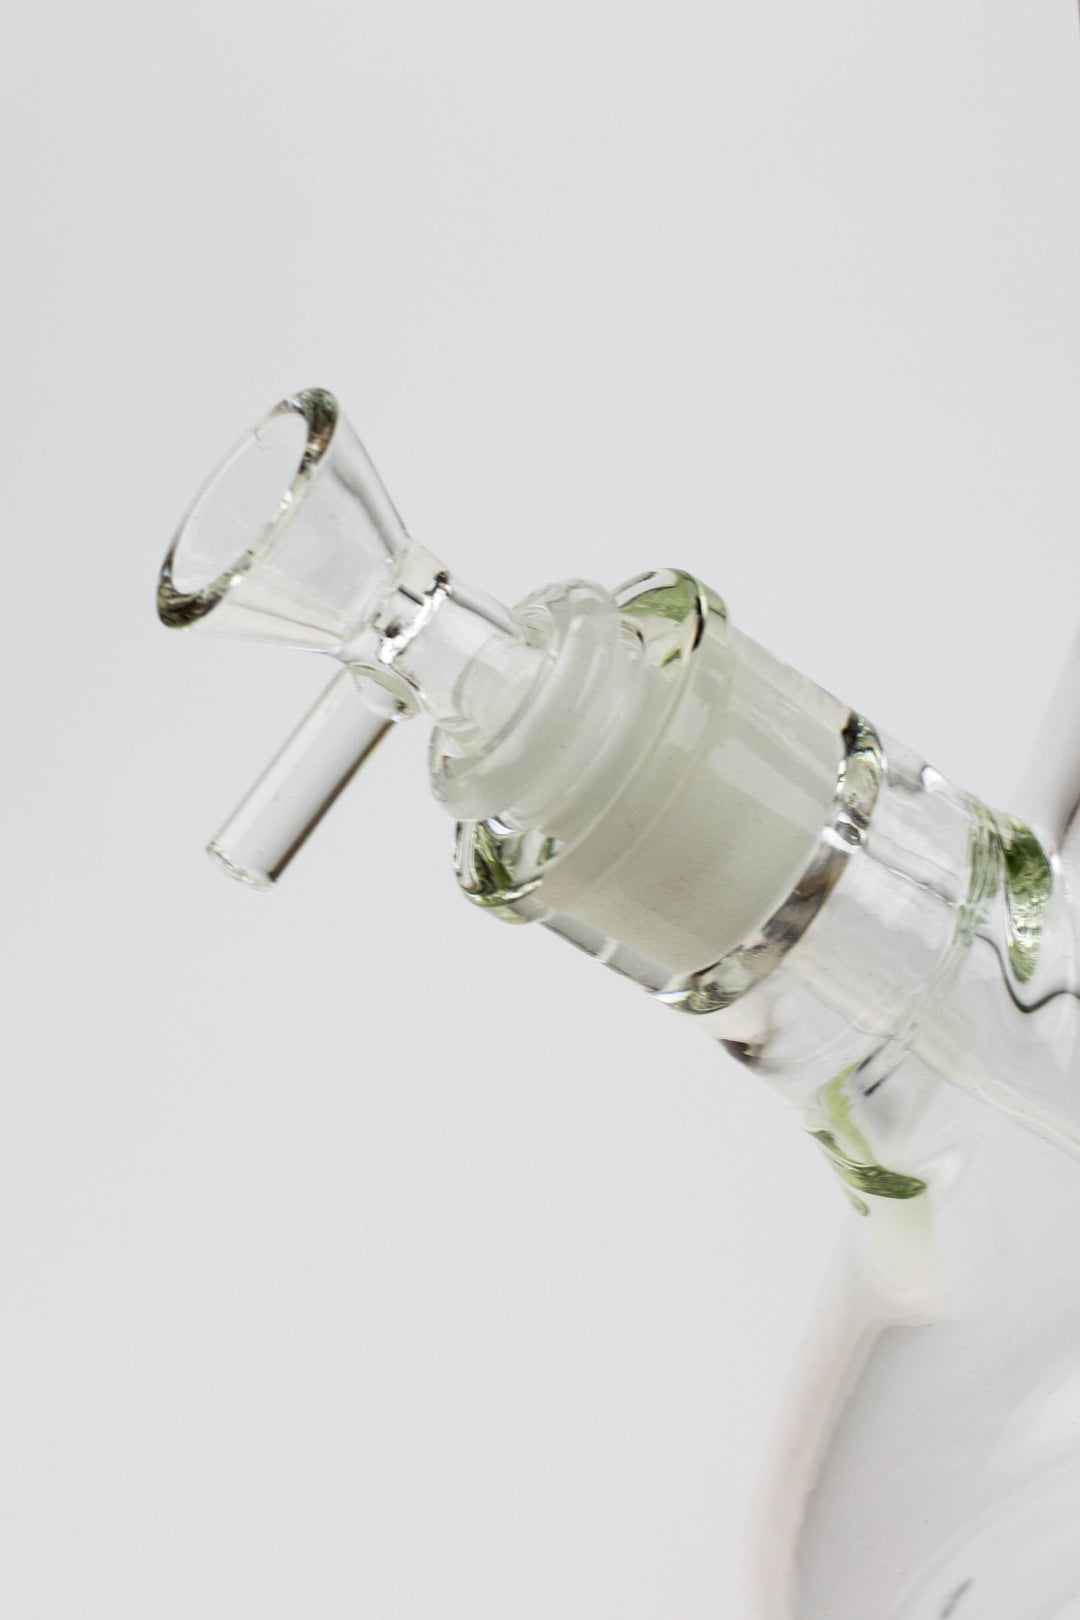 Kush curved tube glass water pipes_1